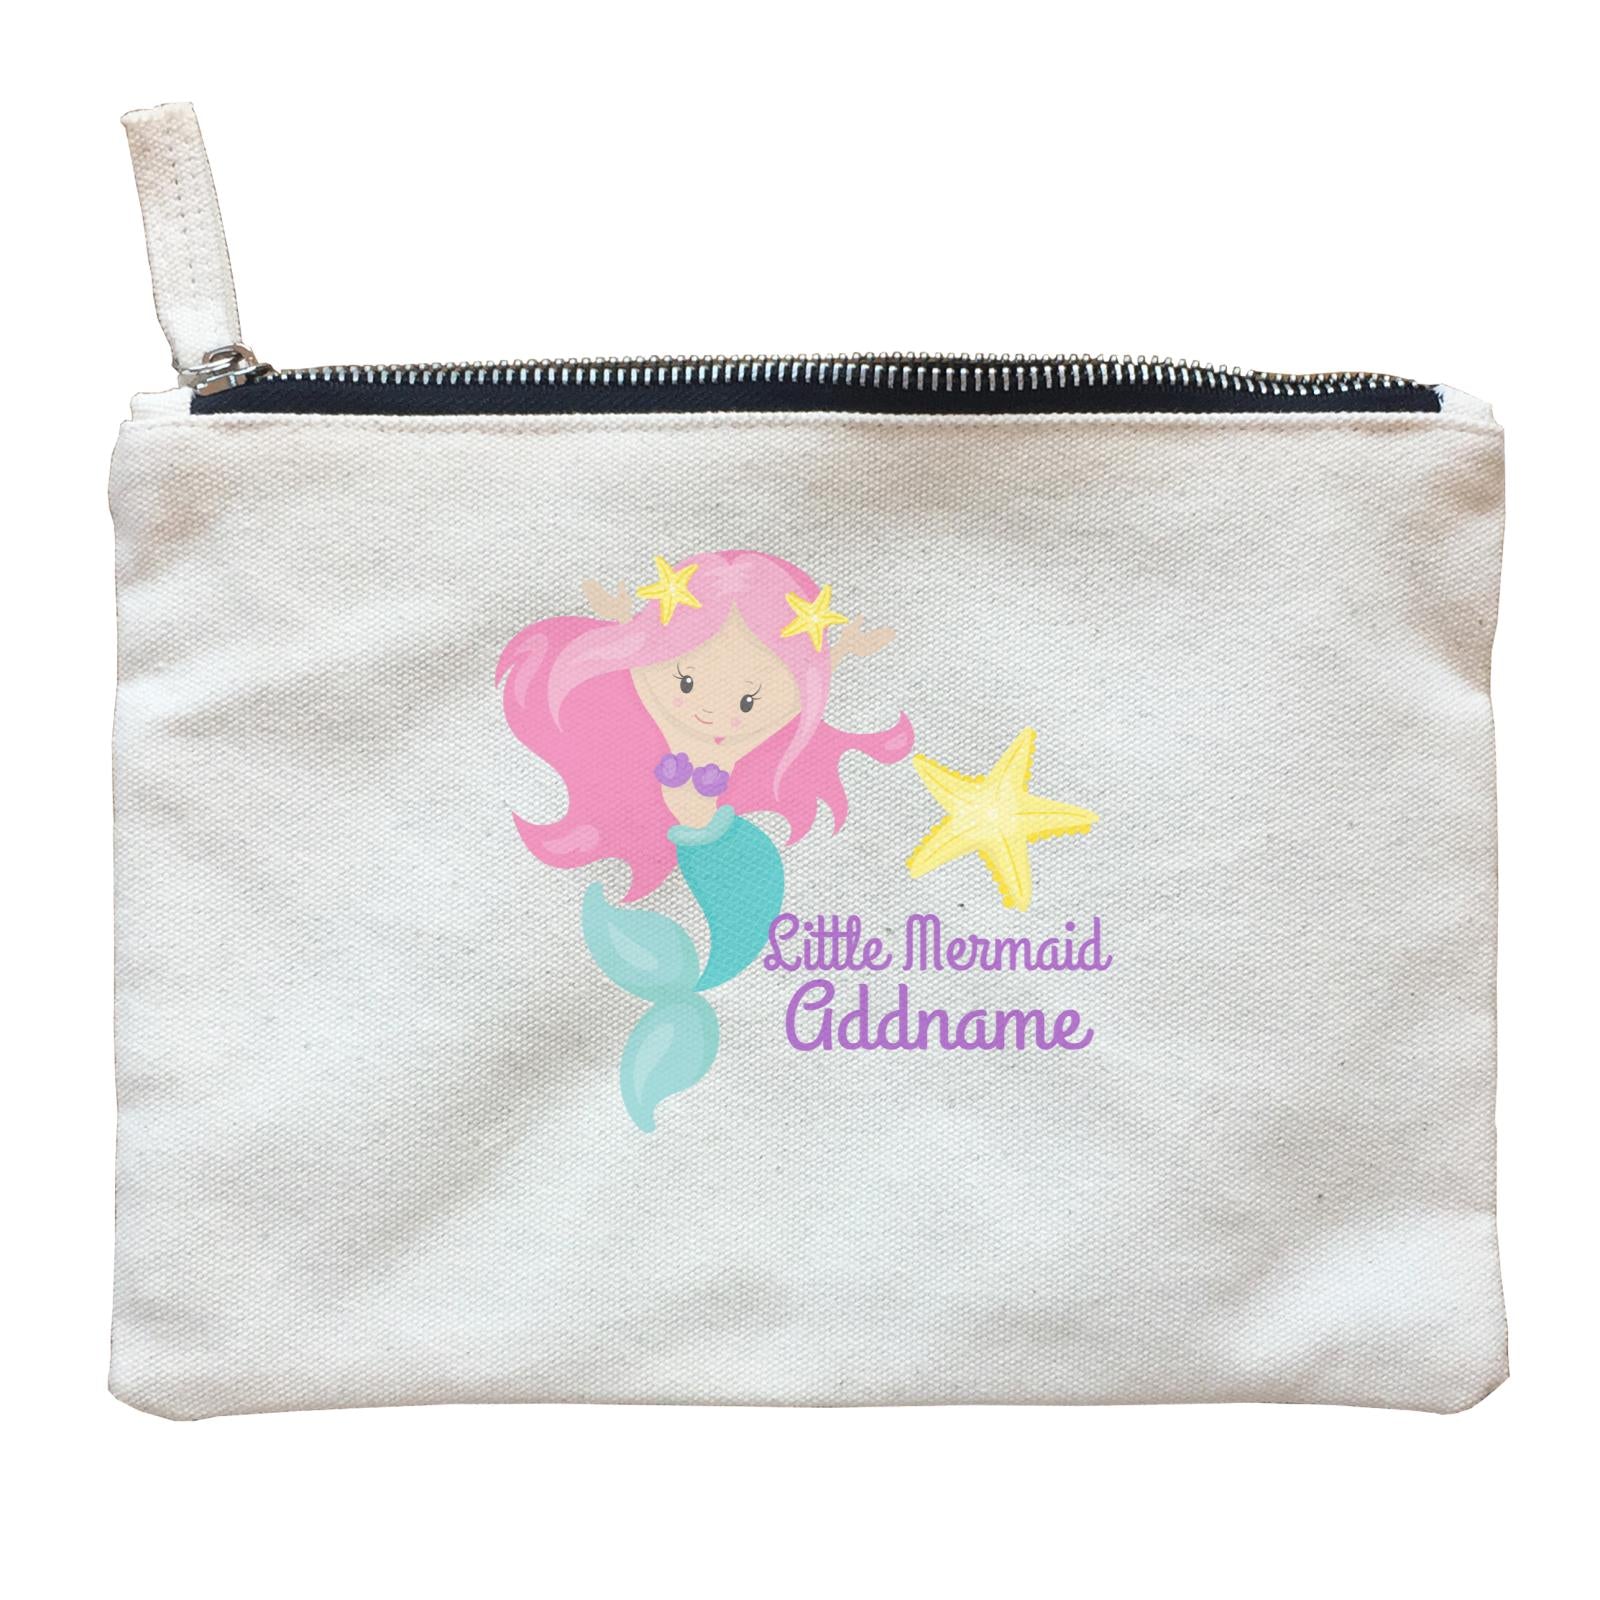 Little Mermaid Celebrating with Starfish Addname Zipper Pouch